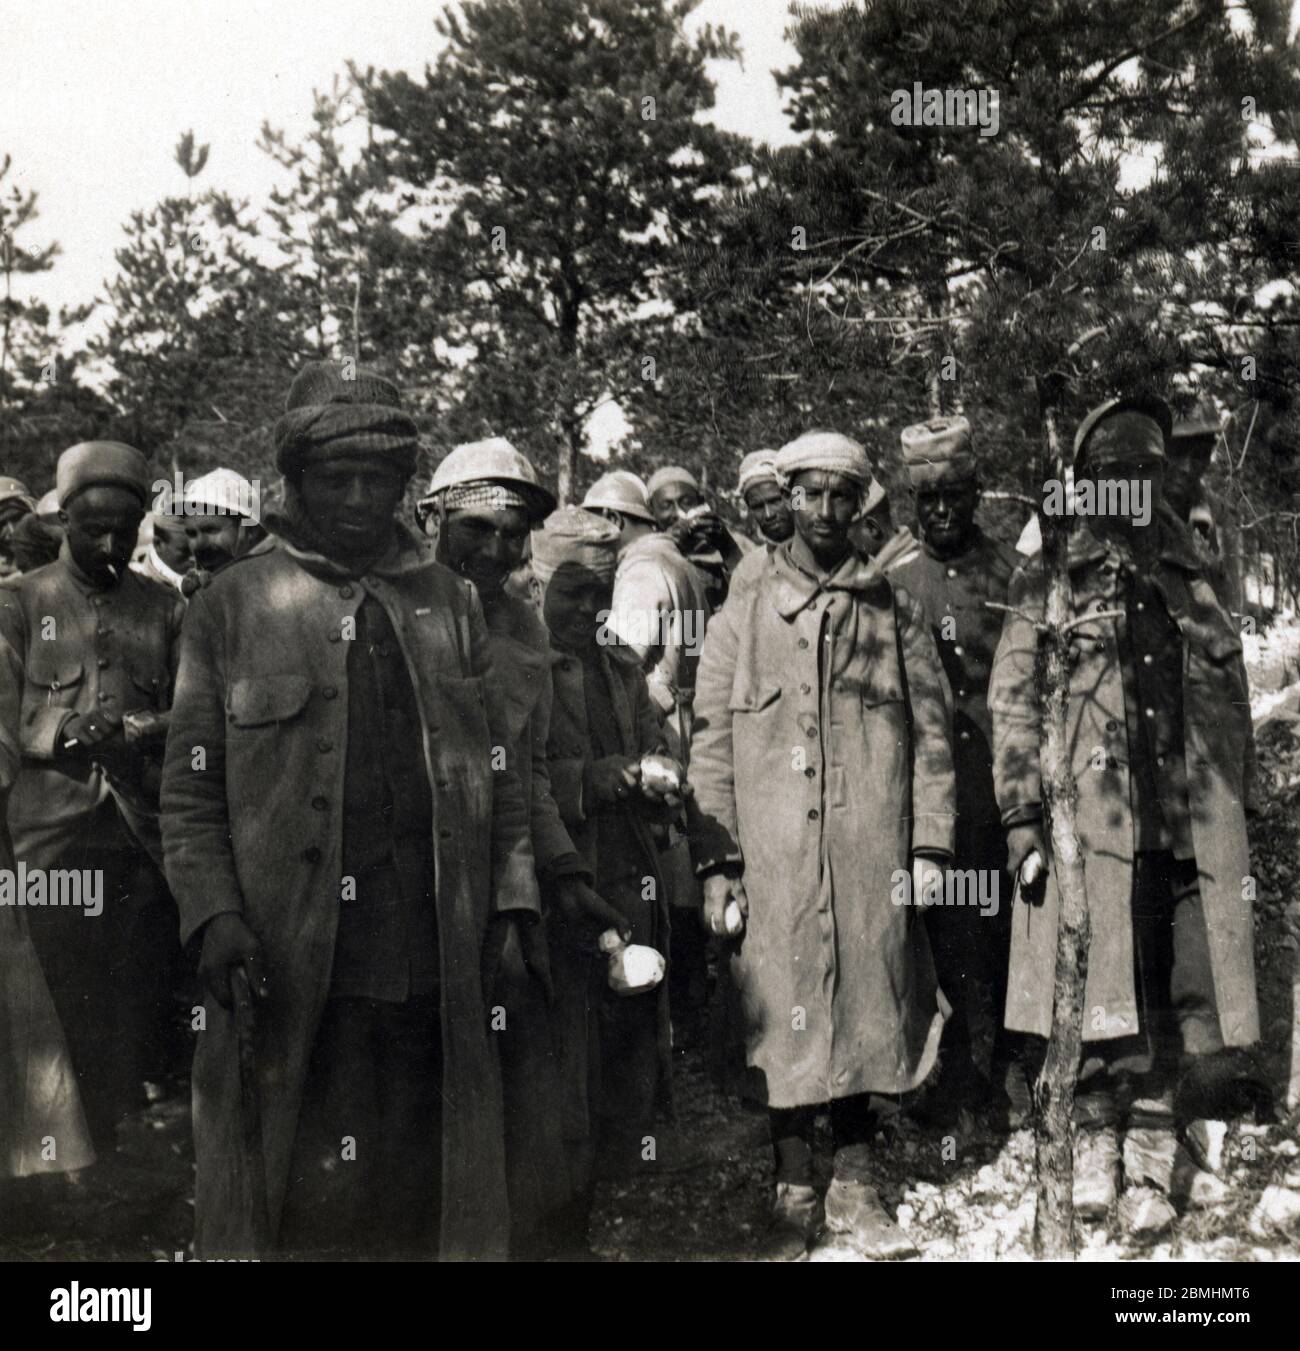 Premiere guerre mondiale : soldats des troupes coloniales, vers 1914 - Photographie (WWI : Soldiers from the French Colonial Forces, 1914) Collection Stockfoto